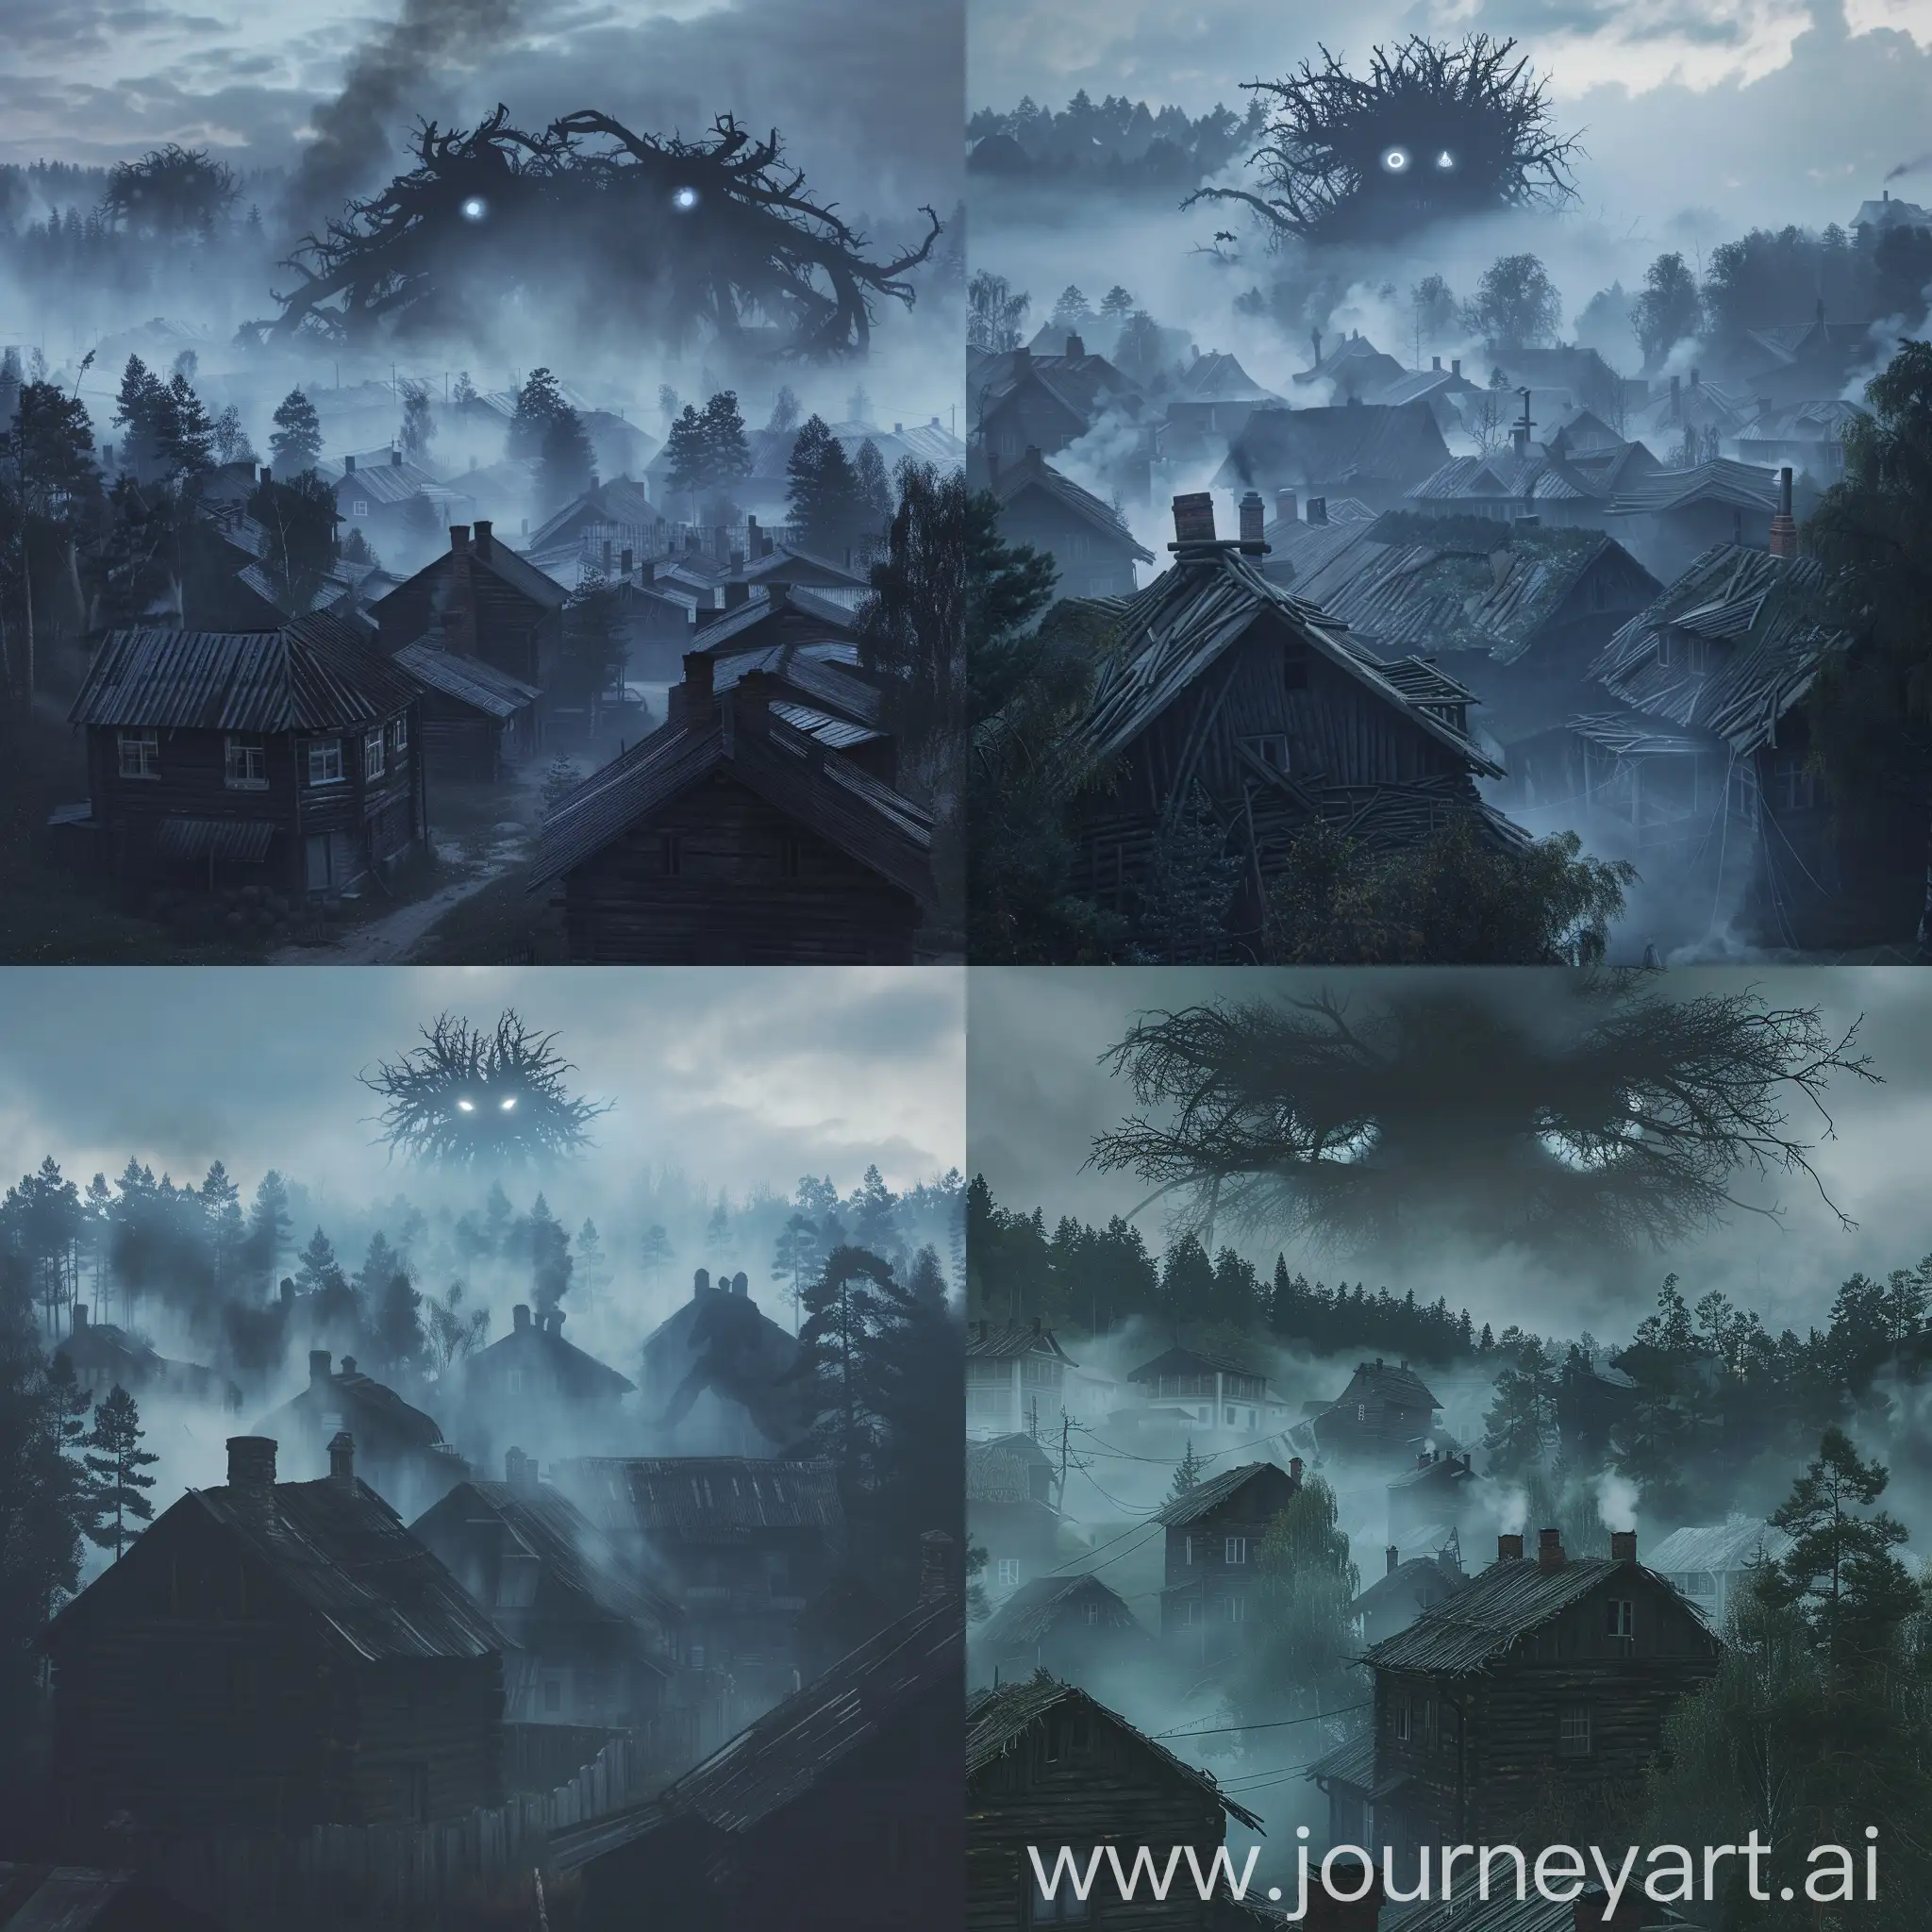 Mystical-Russian-Village-at-Night-Enigmatic-Creatures-in-the-Mist